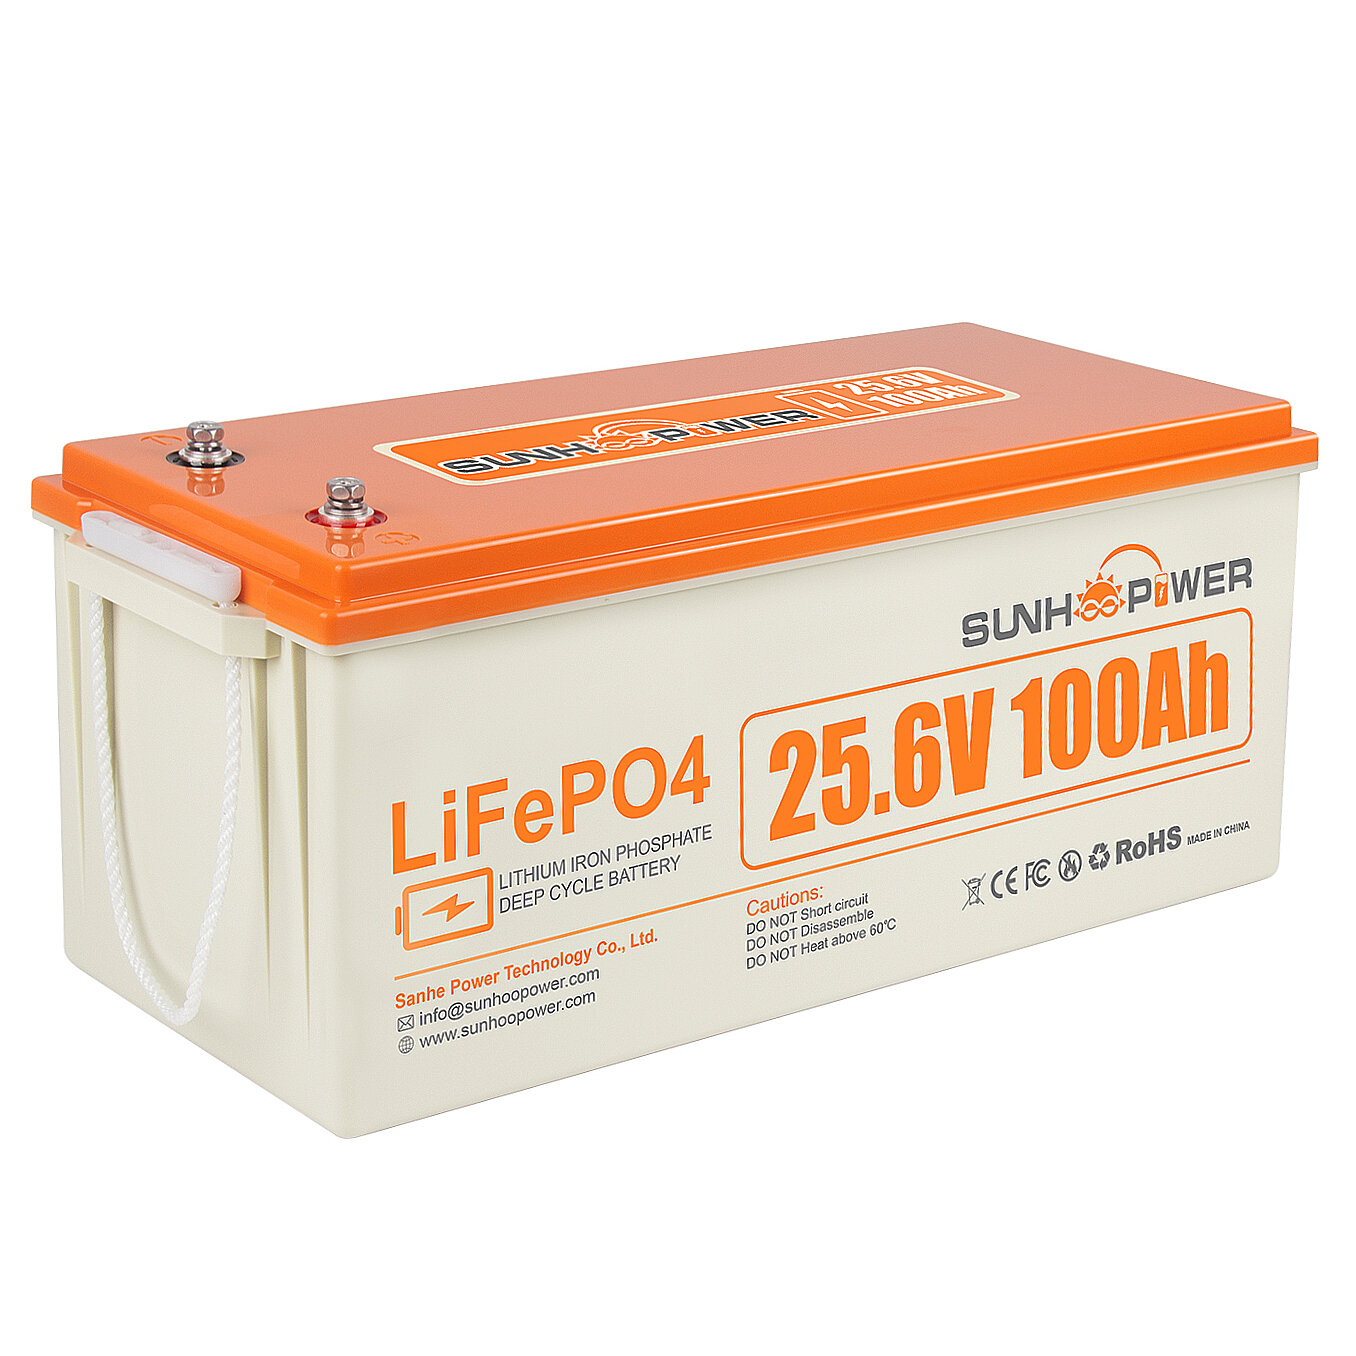 [EU Direct] SUNHOOPOWER 24V 100AH LiFePO4 Battery, 2560Wh Rechargeable Lithium Battery Built-in 100A BMS, Self-Discharge, Perfect for RV, Marine, Energy Storage,Off-Grid Backup Power